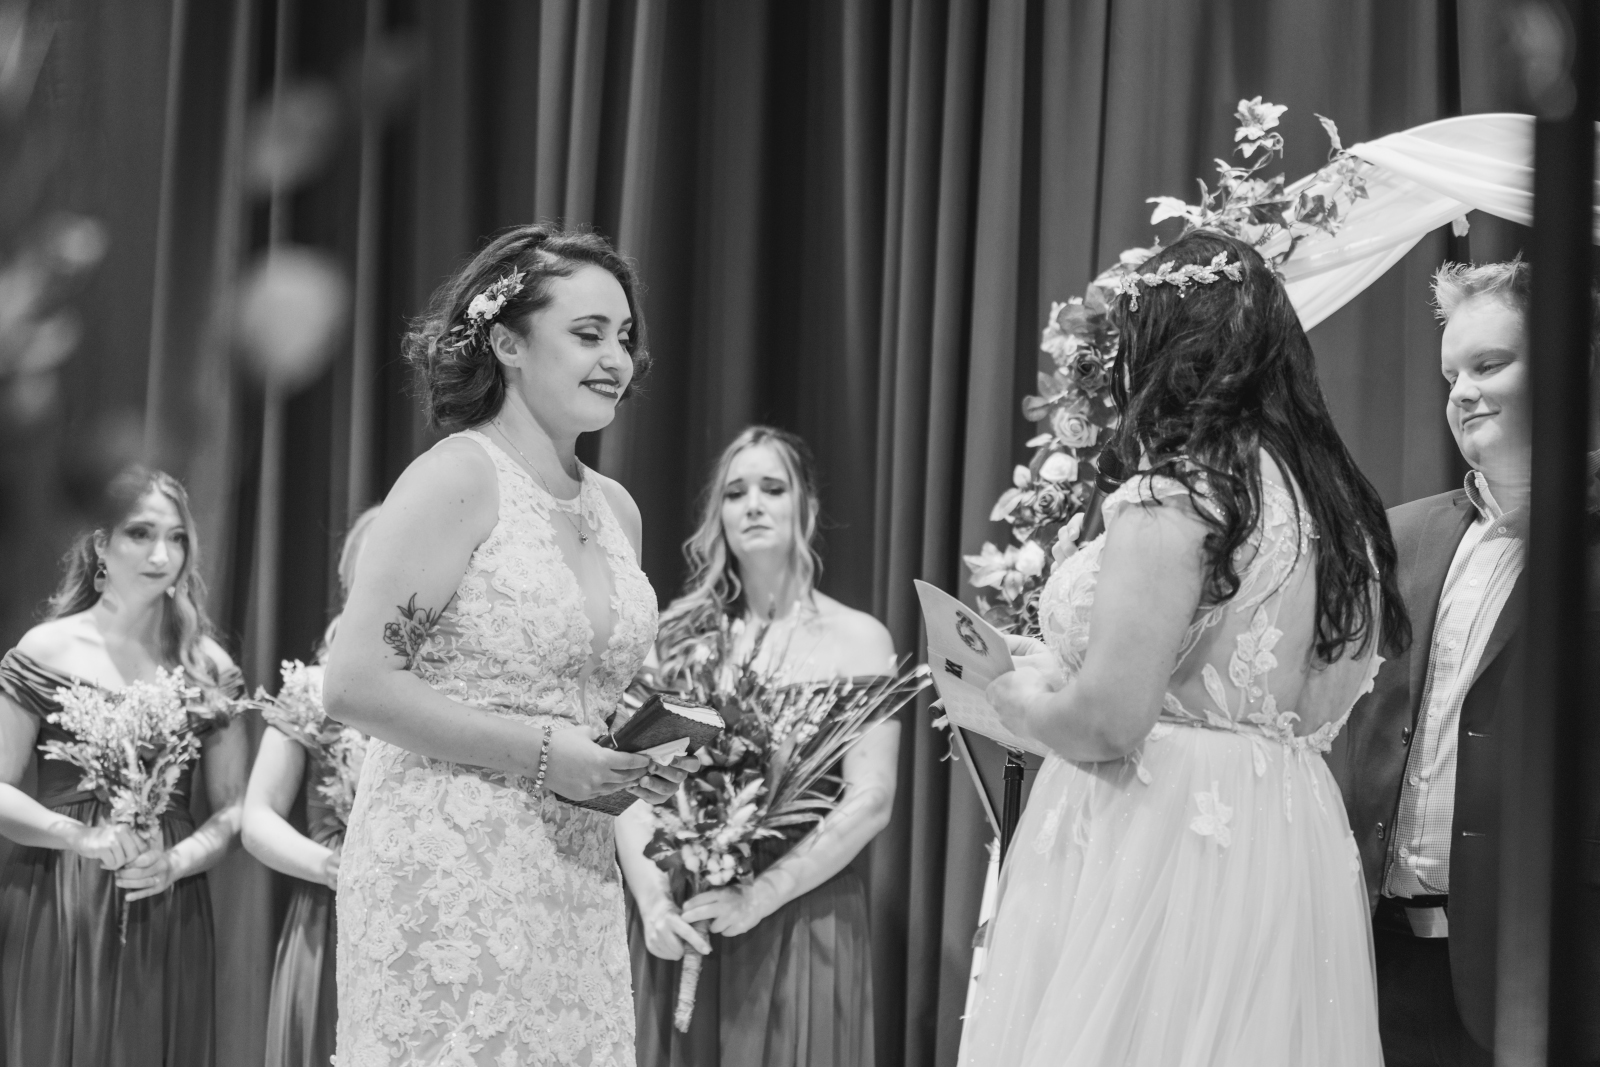 Two brides exchange vows at wedding ceremony, sweet, romantic, classic wedding photo, smile, black and white, two wedding dresses, love is love, beautiful lesbian wedding ceremony at House of Blues Cleveland